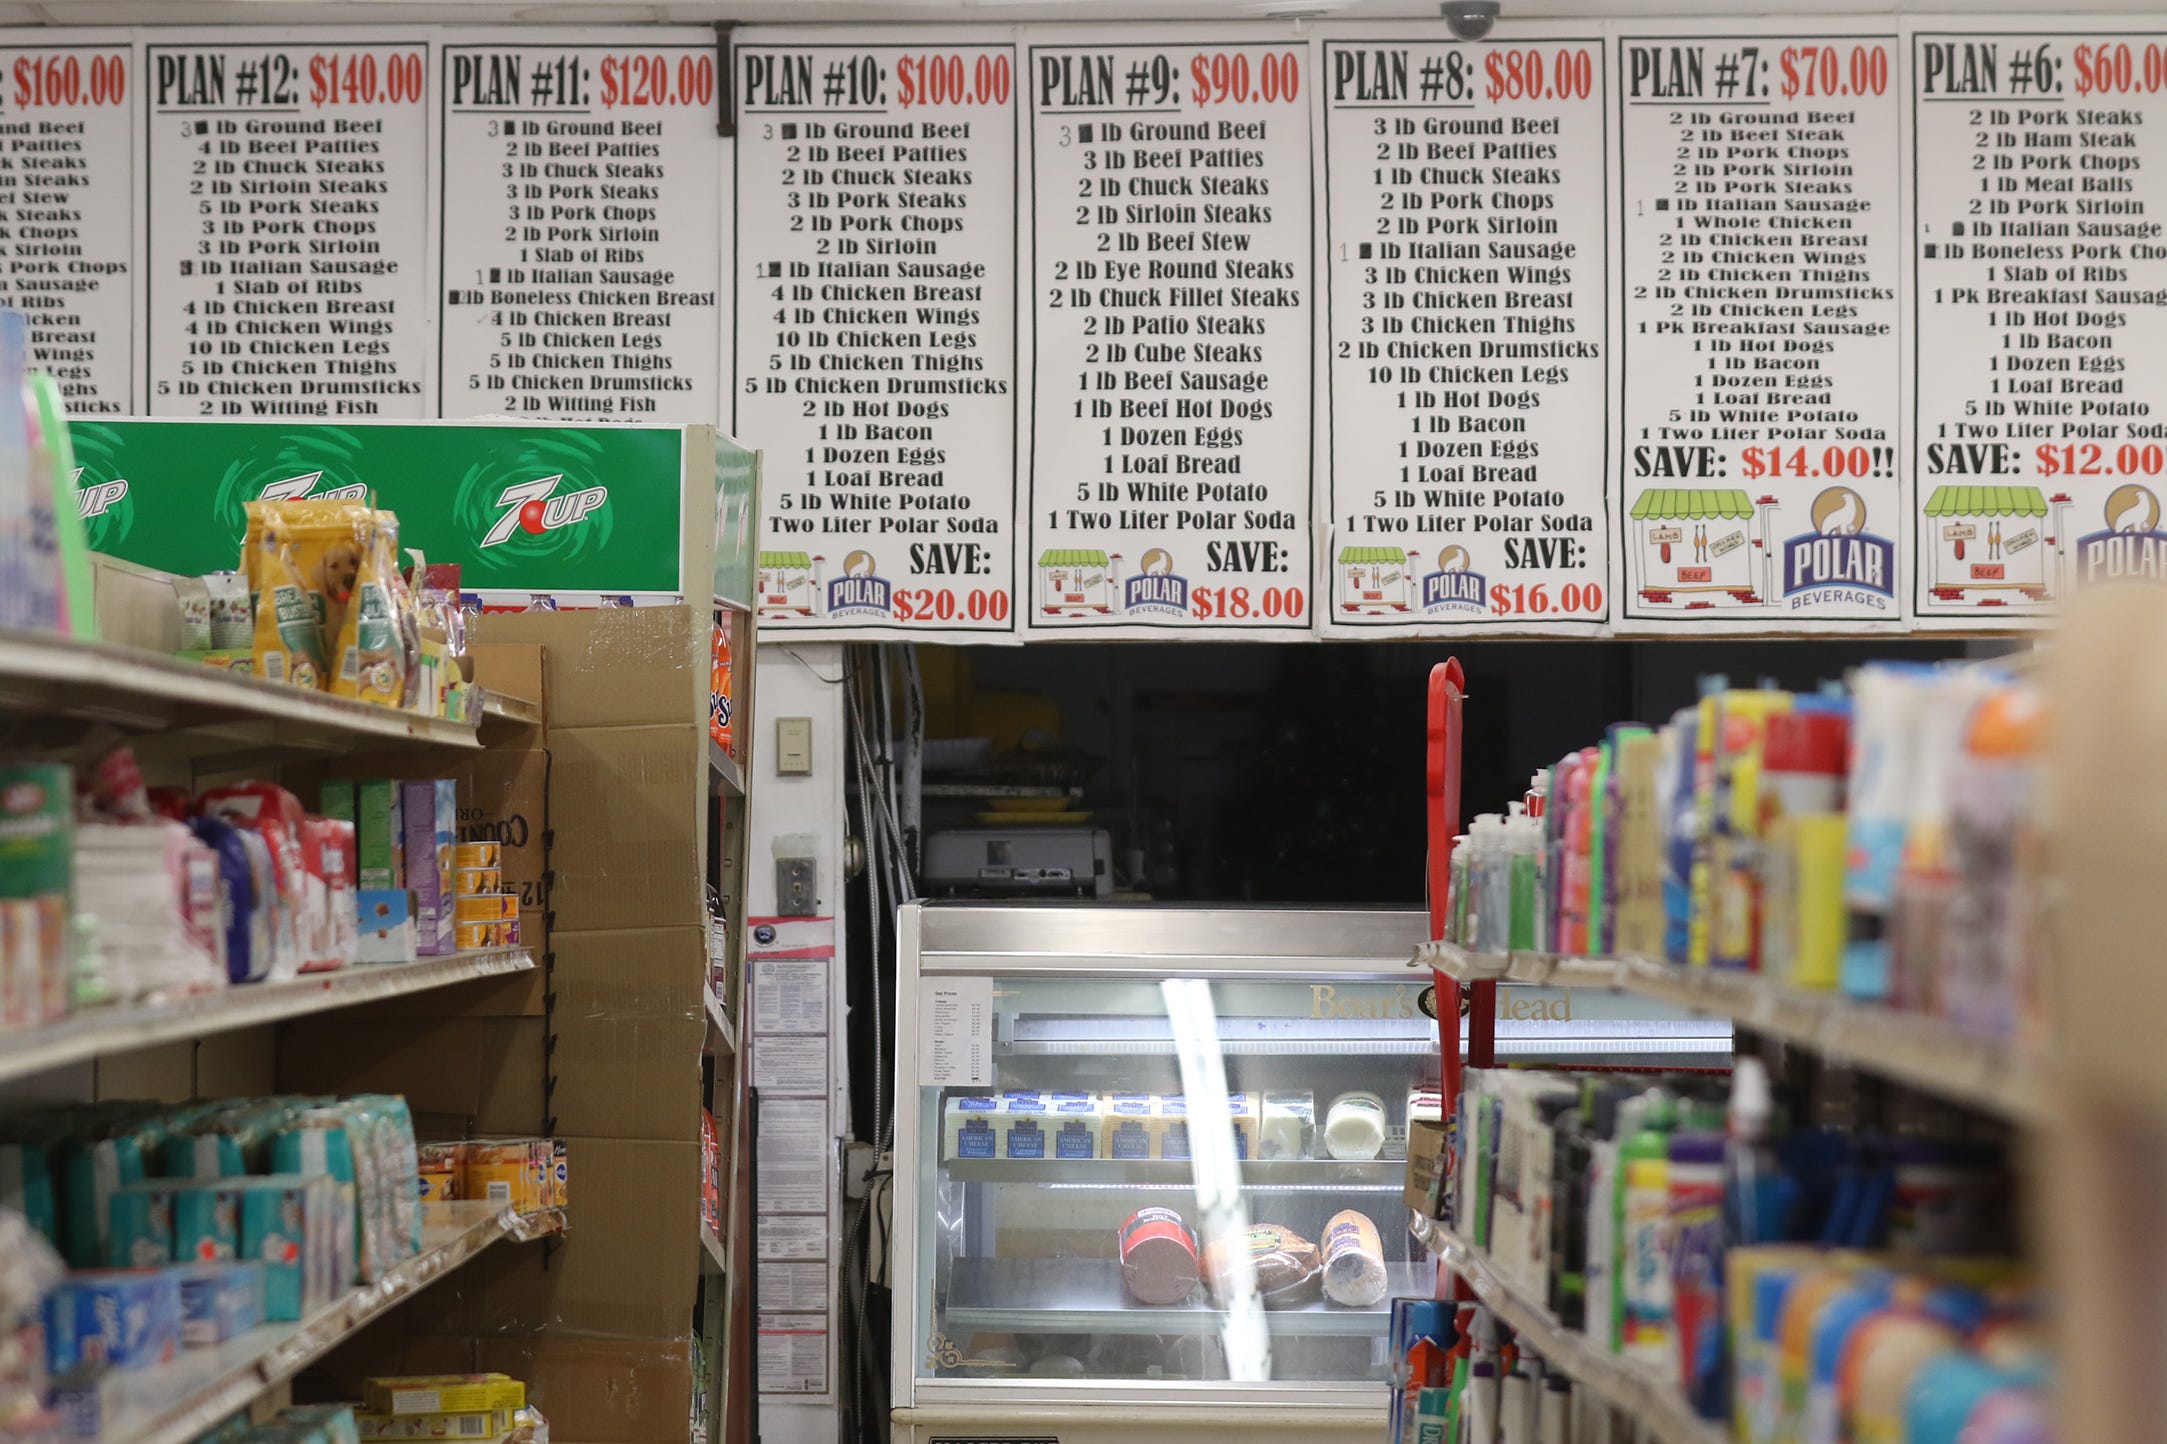 Your Rochester grocery store is being graded. What it means, and the grades